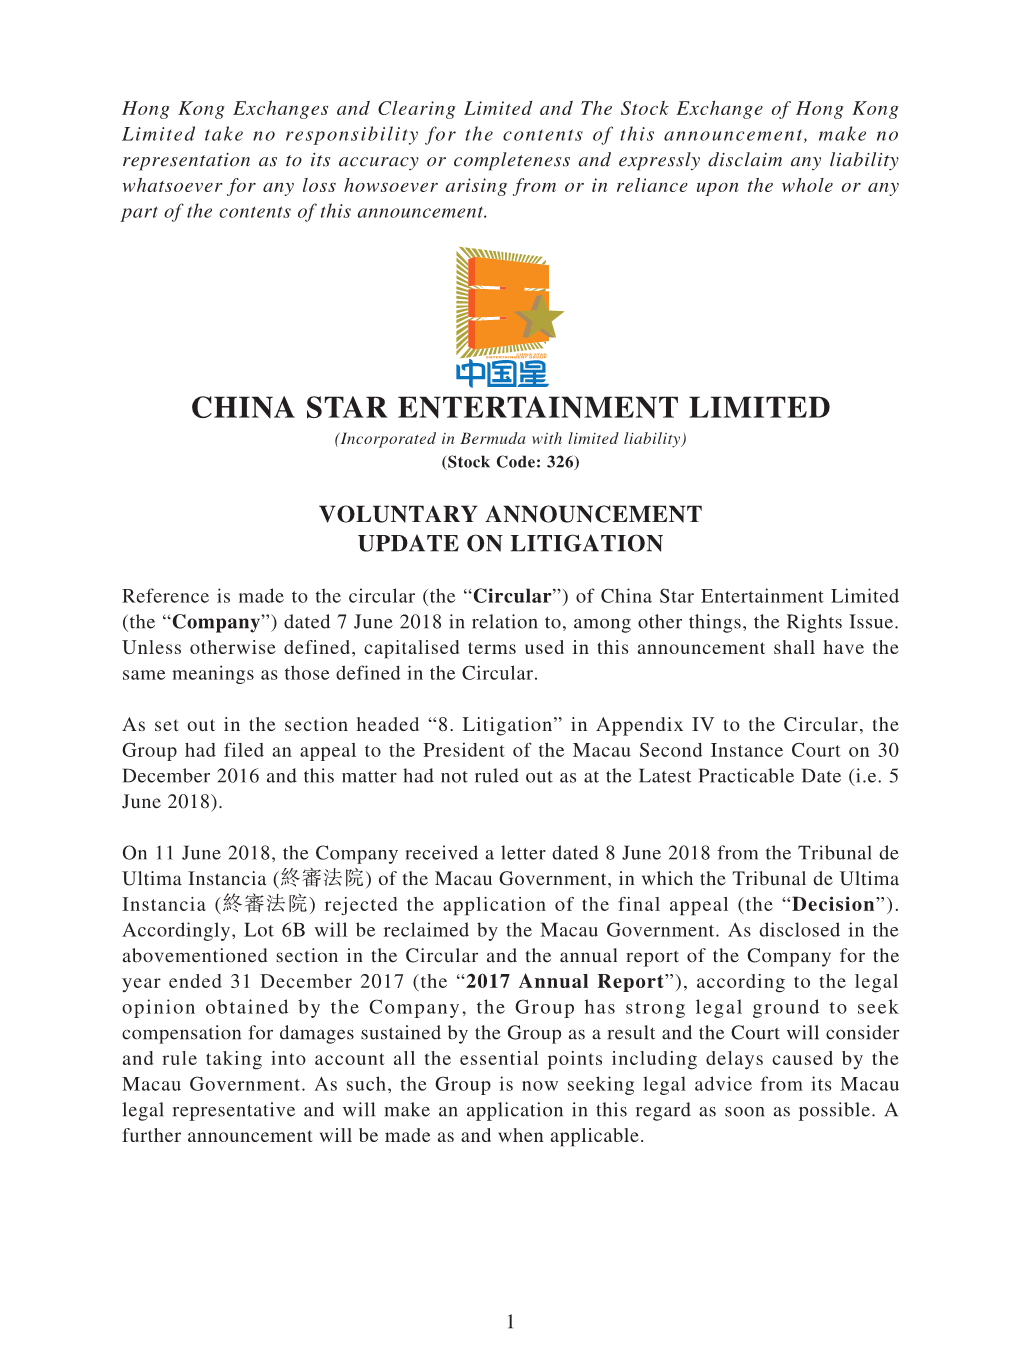 CHINA STAR ENTERTAINMENT LIMITED (Incorporated in Bermuda with Limited Liability) (Stock Code: 326)